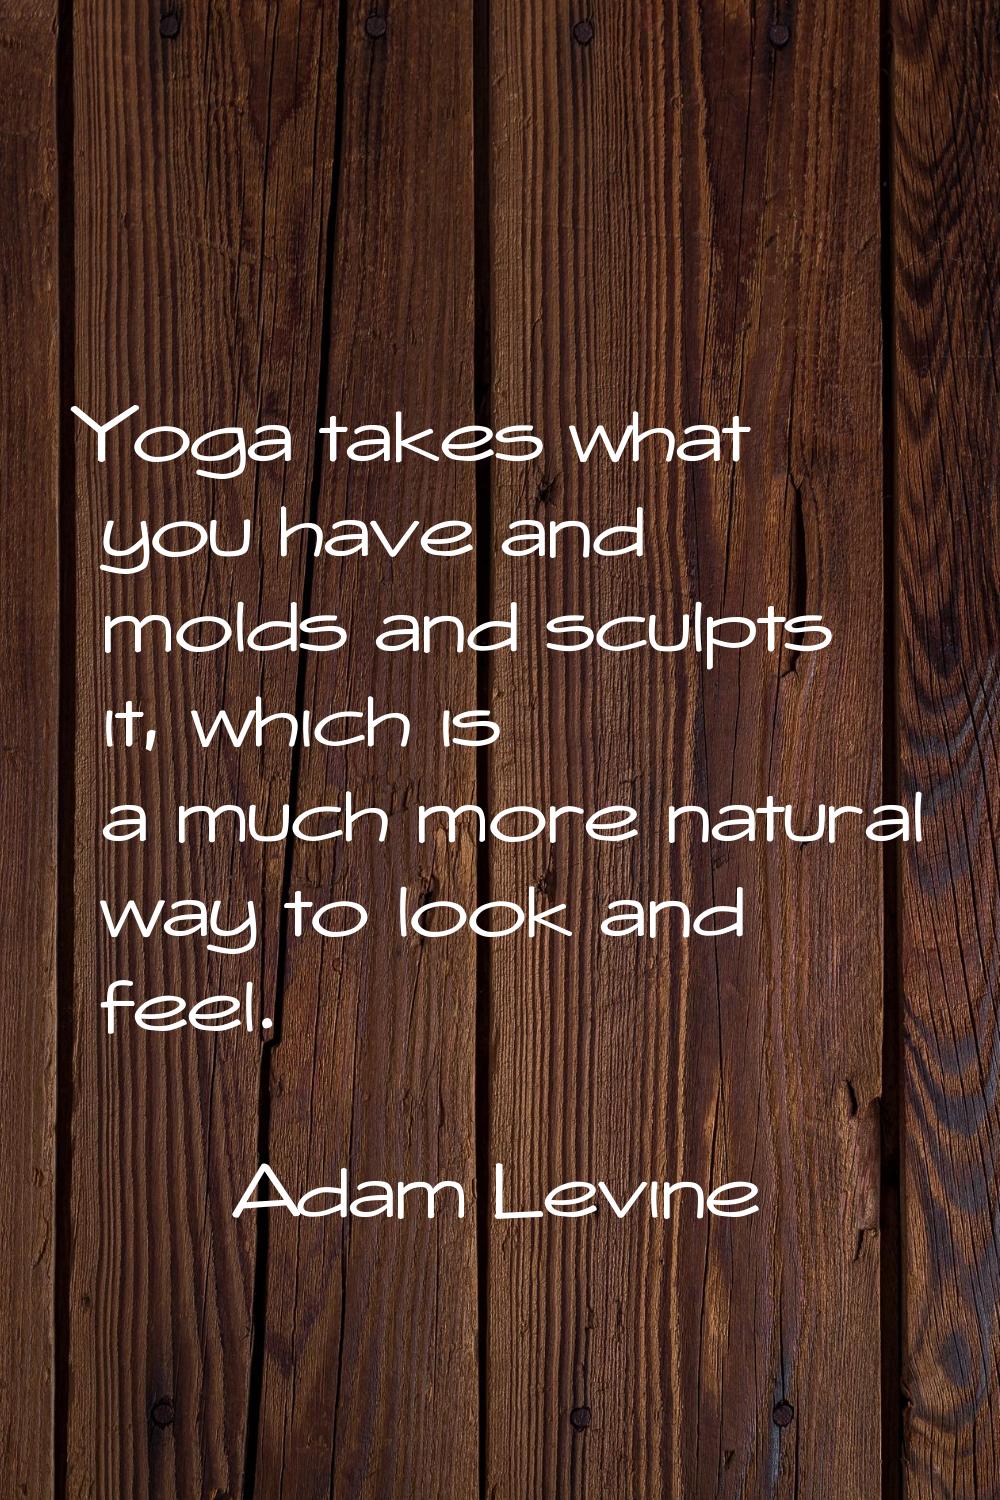 Yoga takes what you have and molds and sculpts it, which is a much more natural way to look and fee